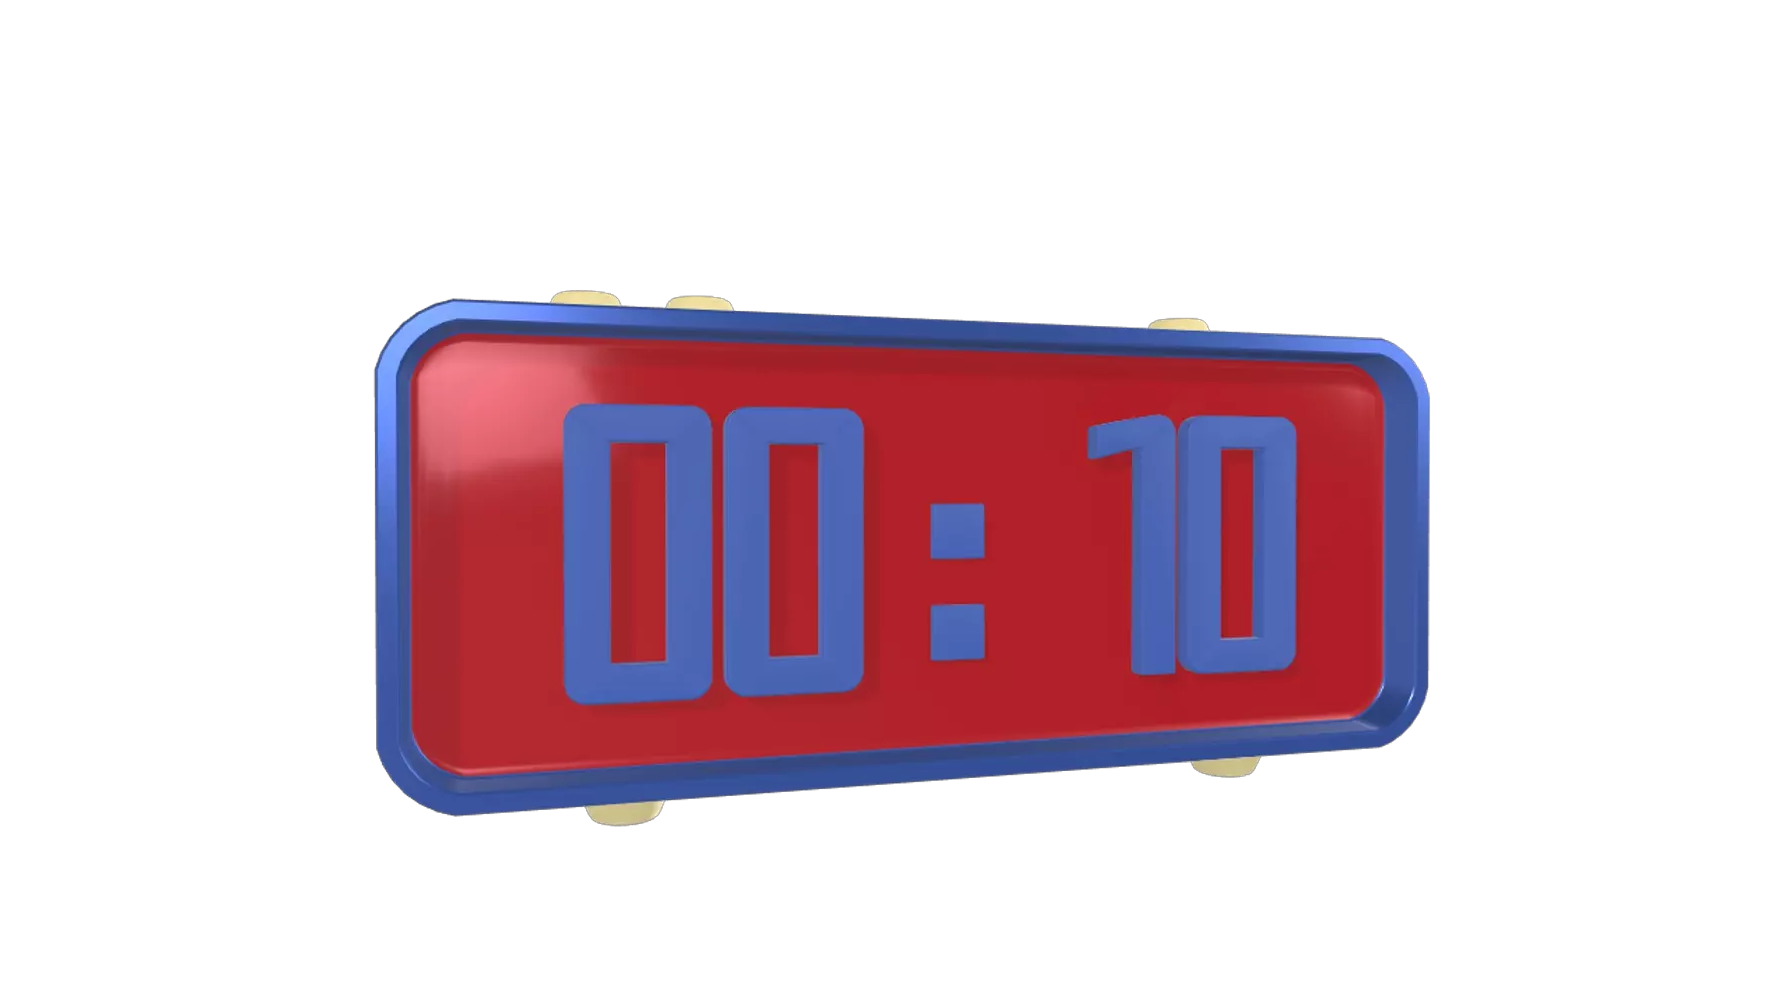 New Year Clock Countdown 3D Graphic